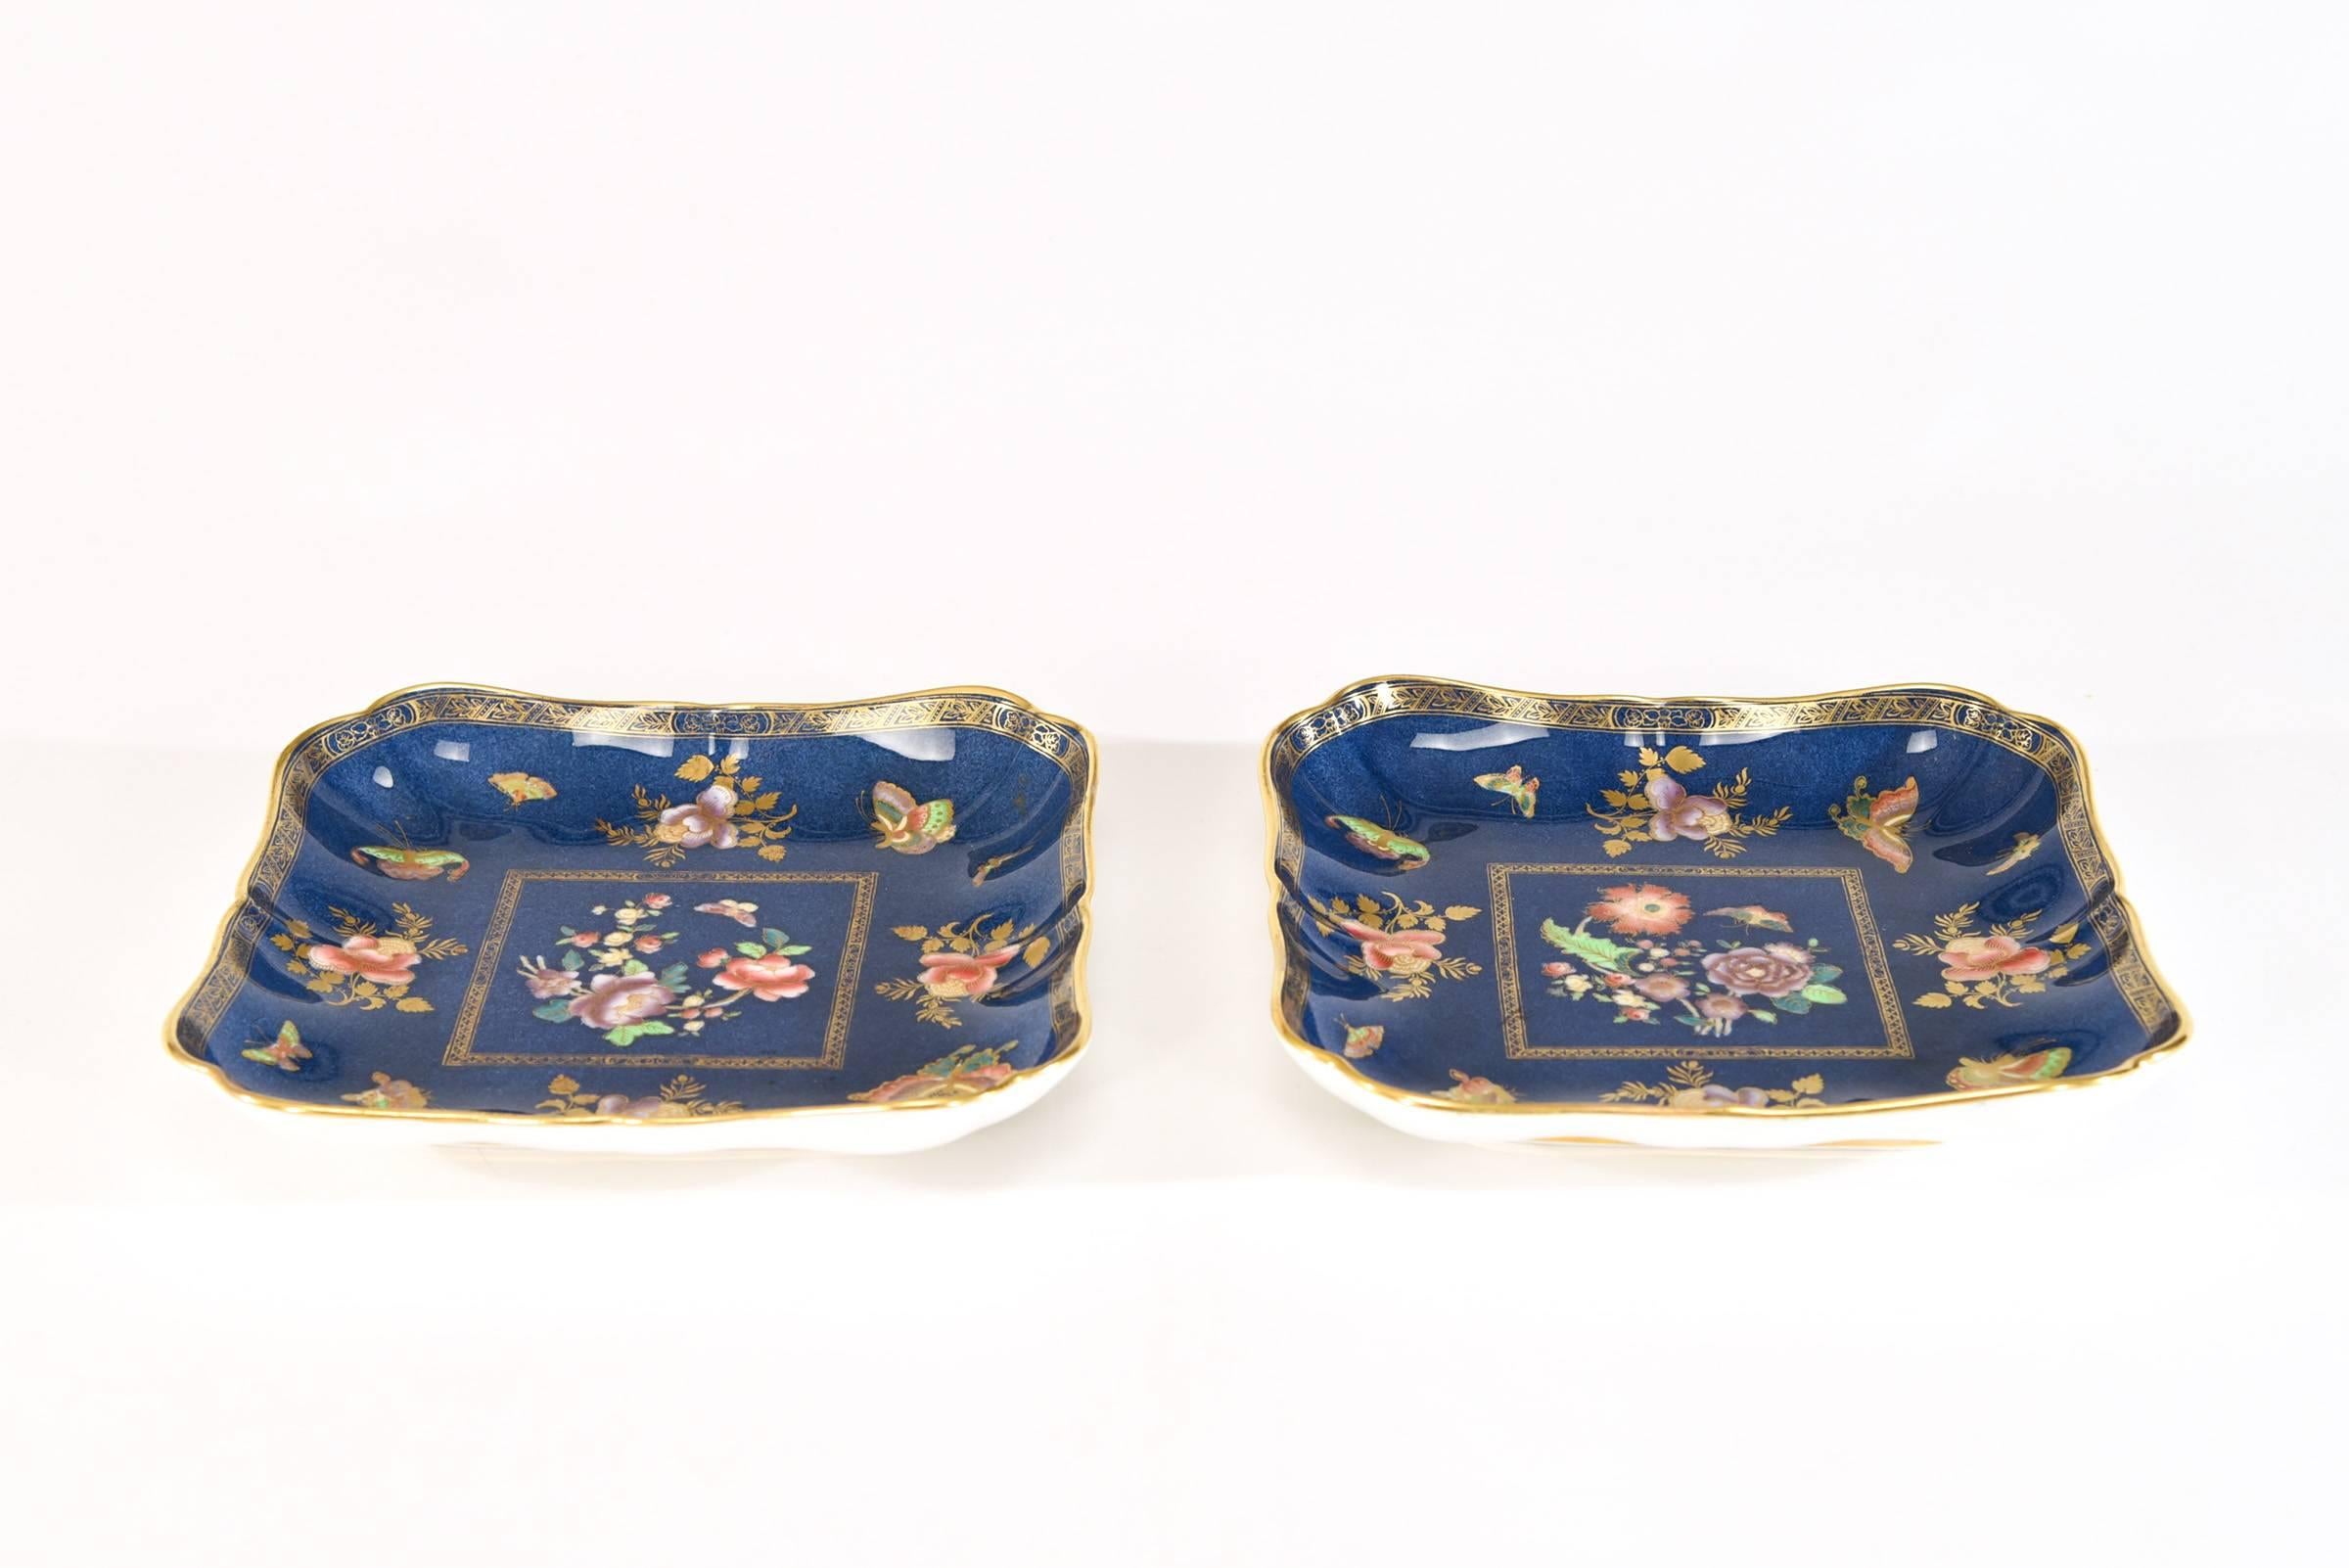 English Copeland Spode Dessert Set 8 Plates, 2 Square Plates Blue w/ Florals Butterfly For Sale